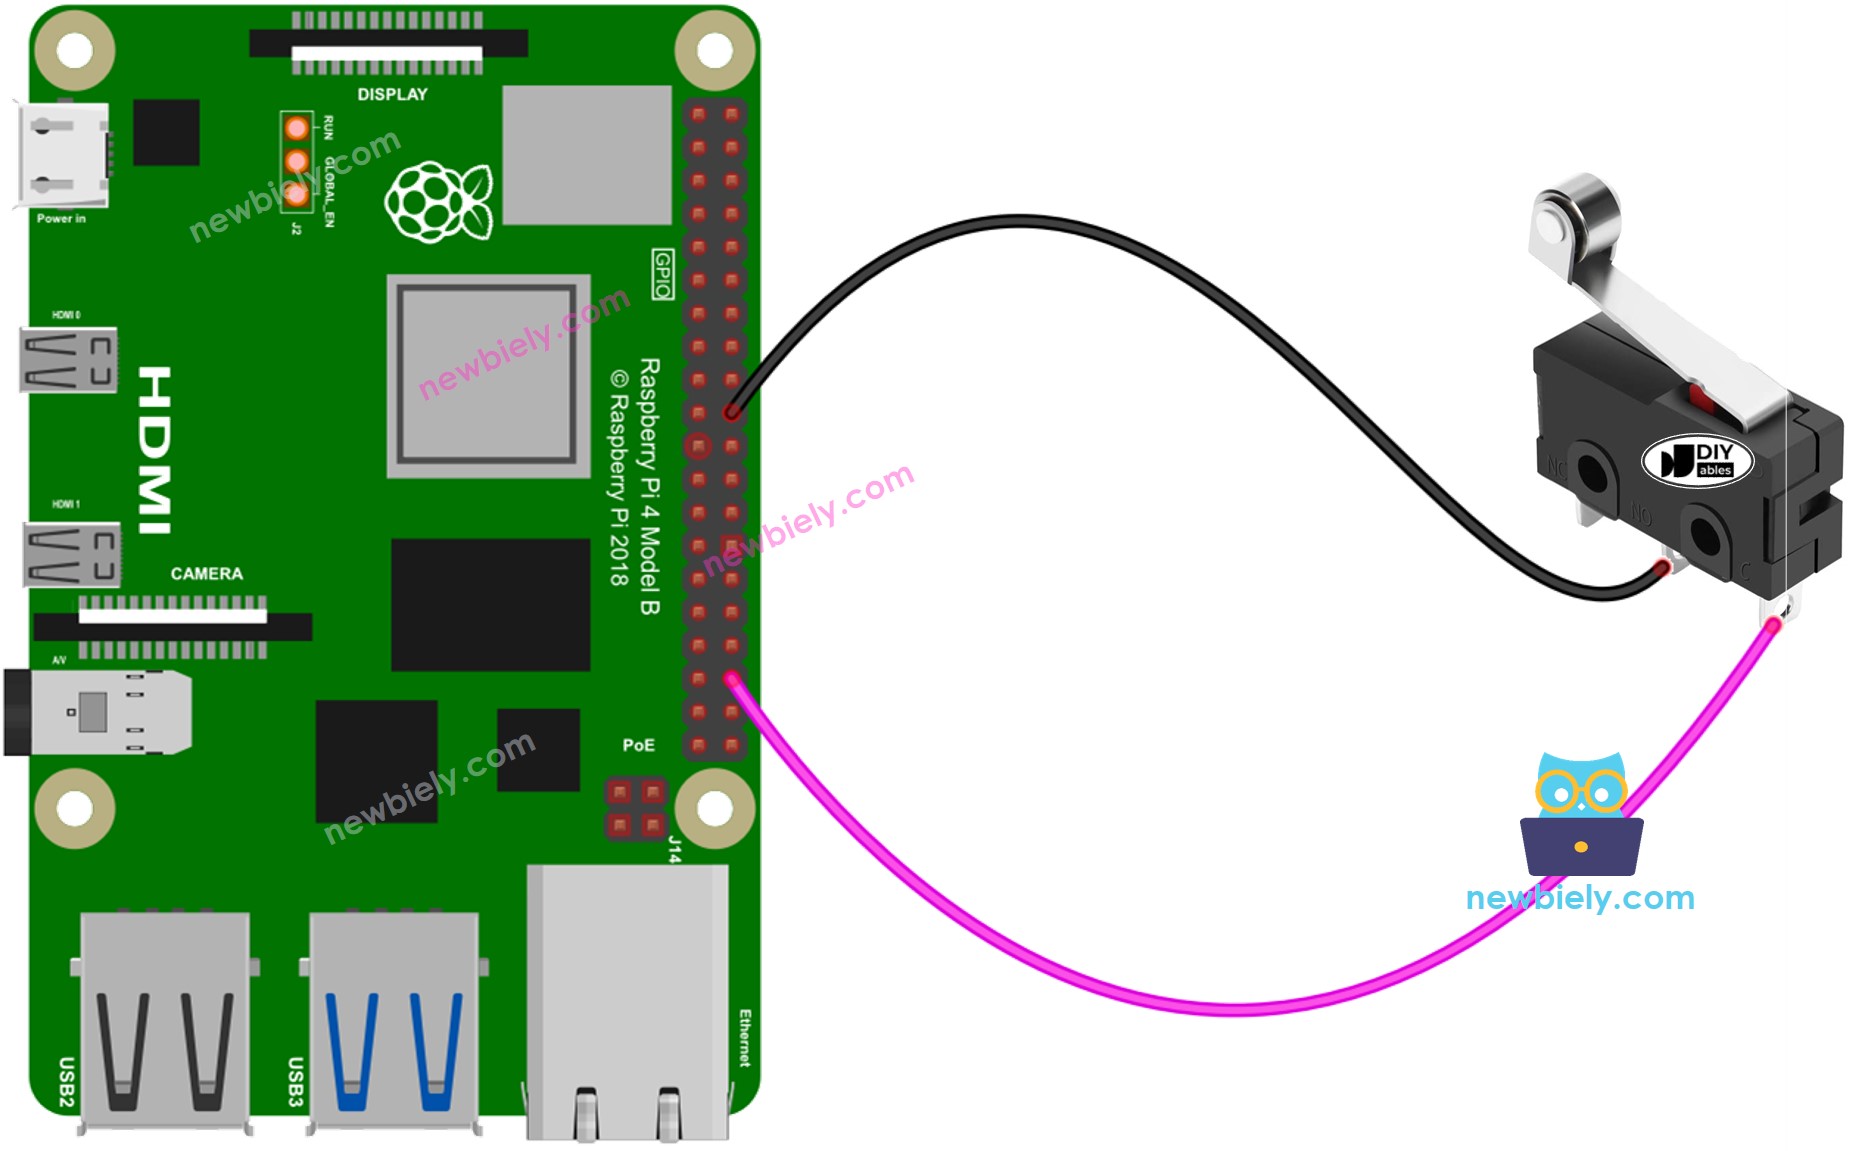 The wiring diagram between Raspberry Pi and Limit Switch